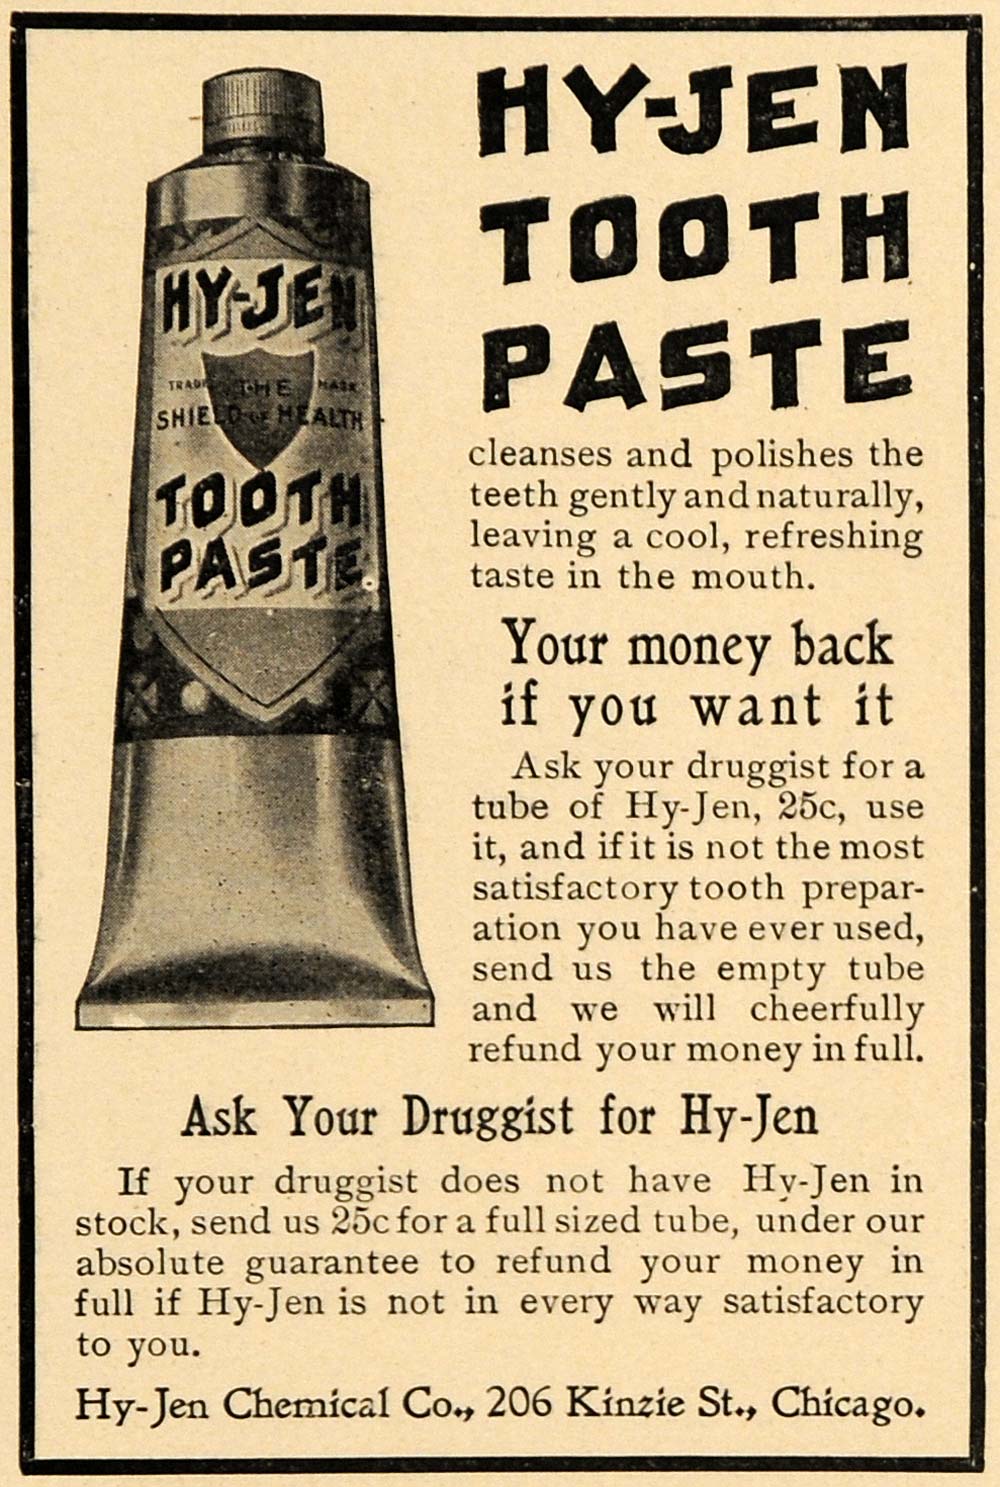 1906 Ad Hy-Jen Chemical Co. Toothpaste Dental Care - ORIGINAL ADVERTISING GUN1